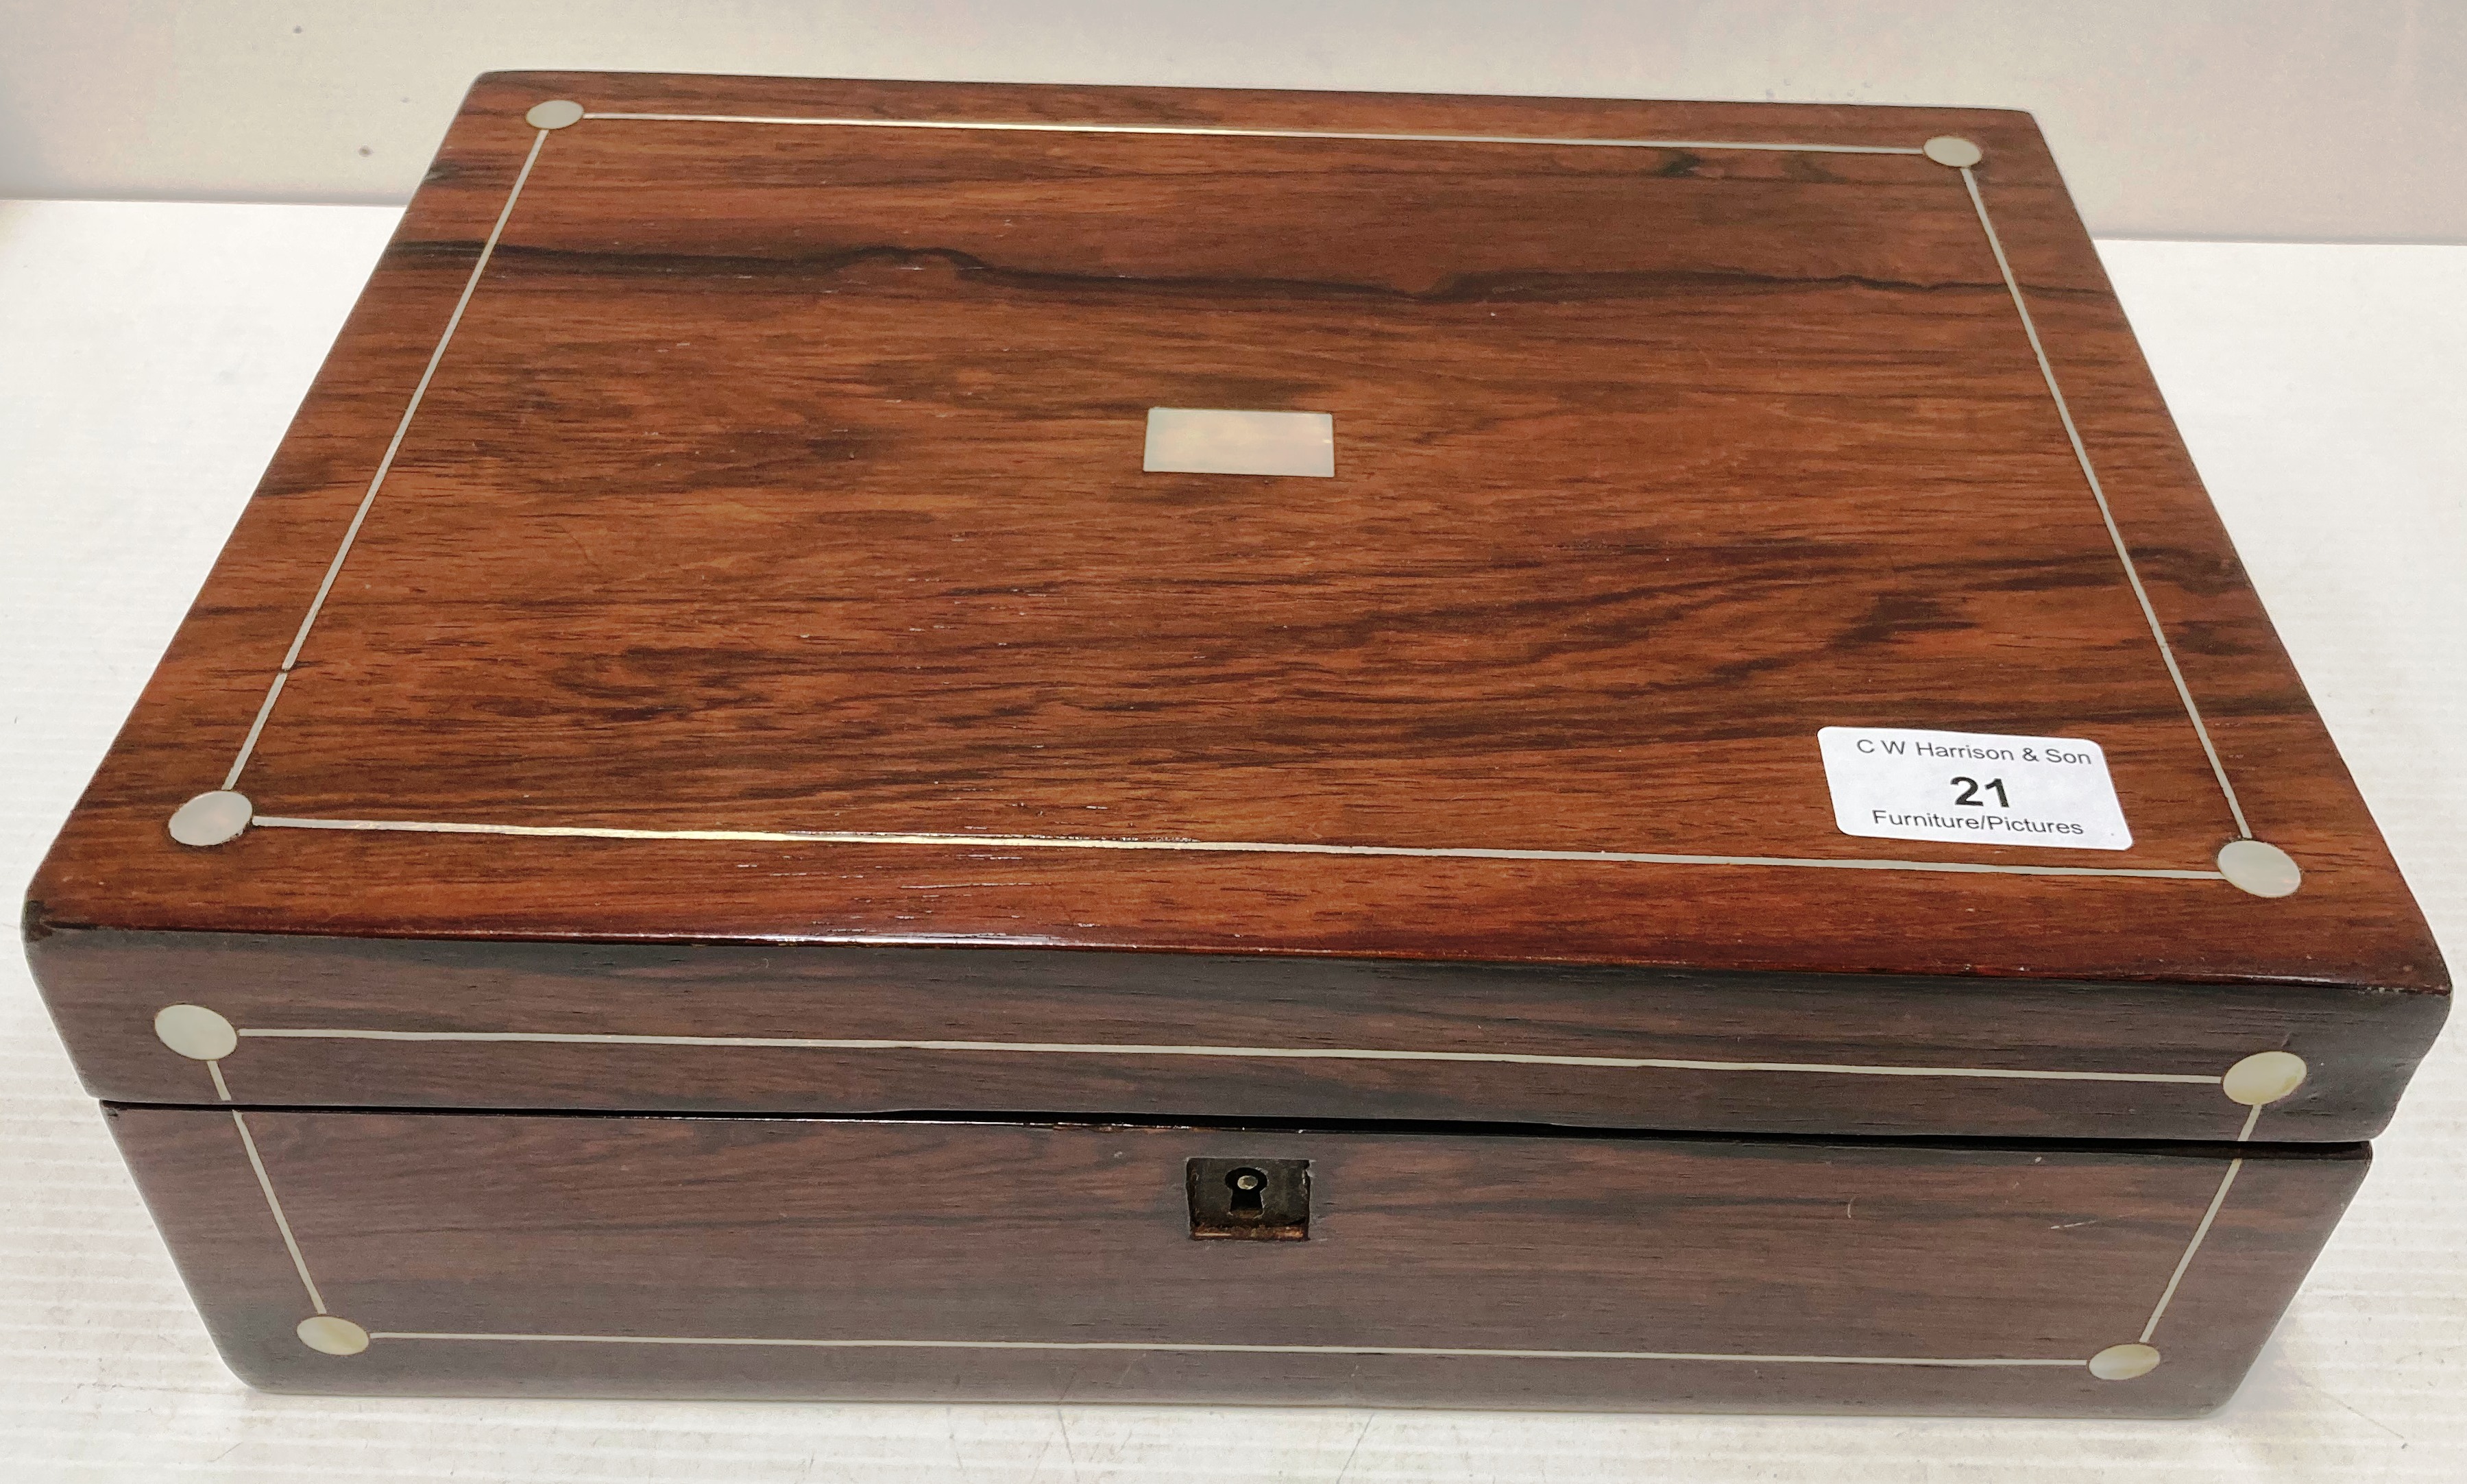 A rosewood box with mother of pearl inlay 30cm x 22cm x 11cm high